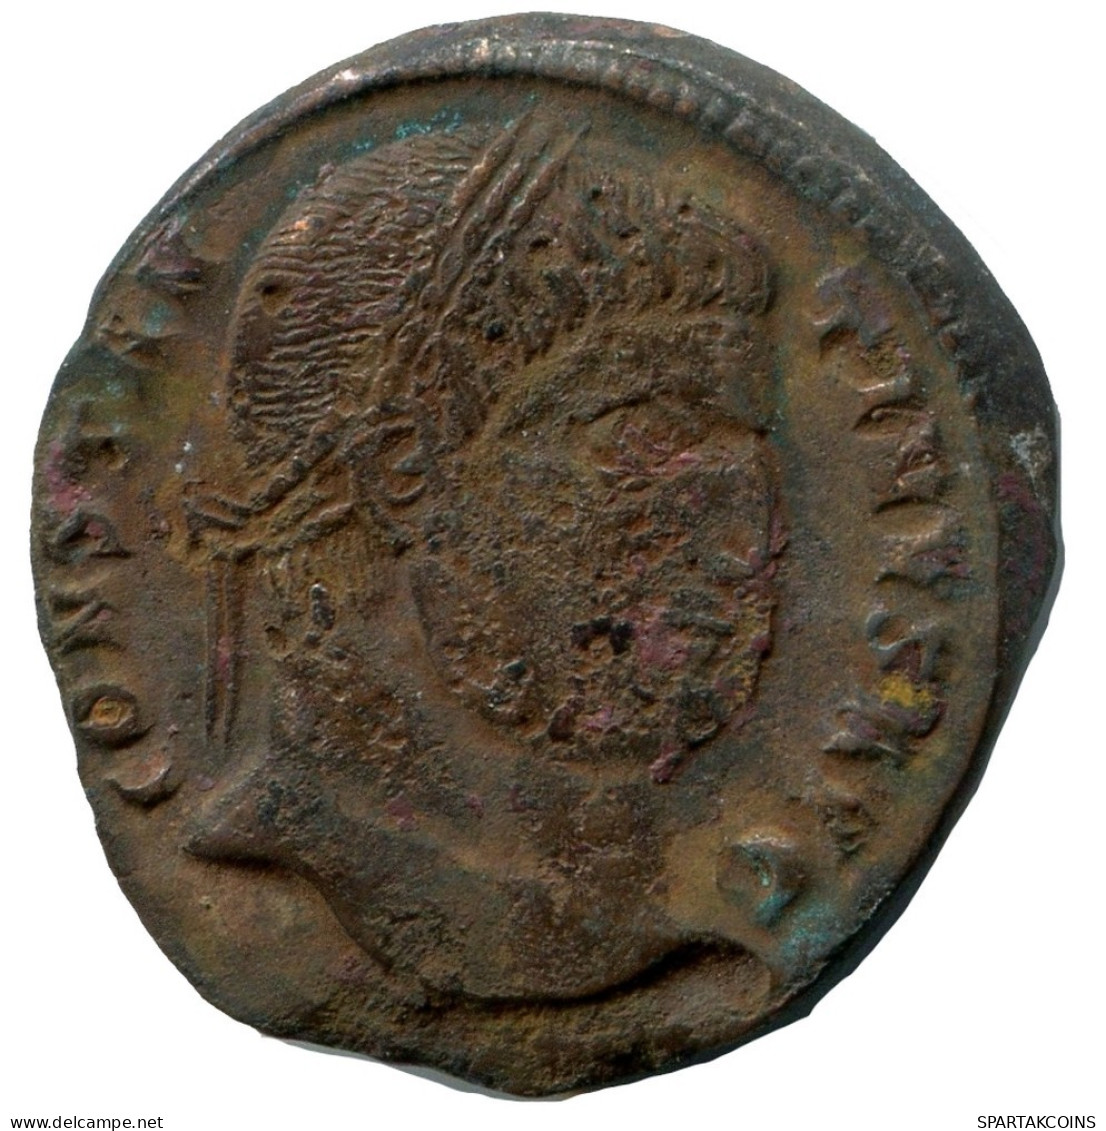 CONSTANTINE I MINTED IN ANTIOCH FOUND IN IHNASYAH HOARD EGYPT #ANC10556.14.E.A - El Impero Christiano (307 / 363)